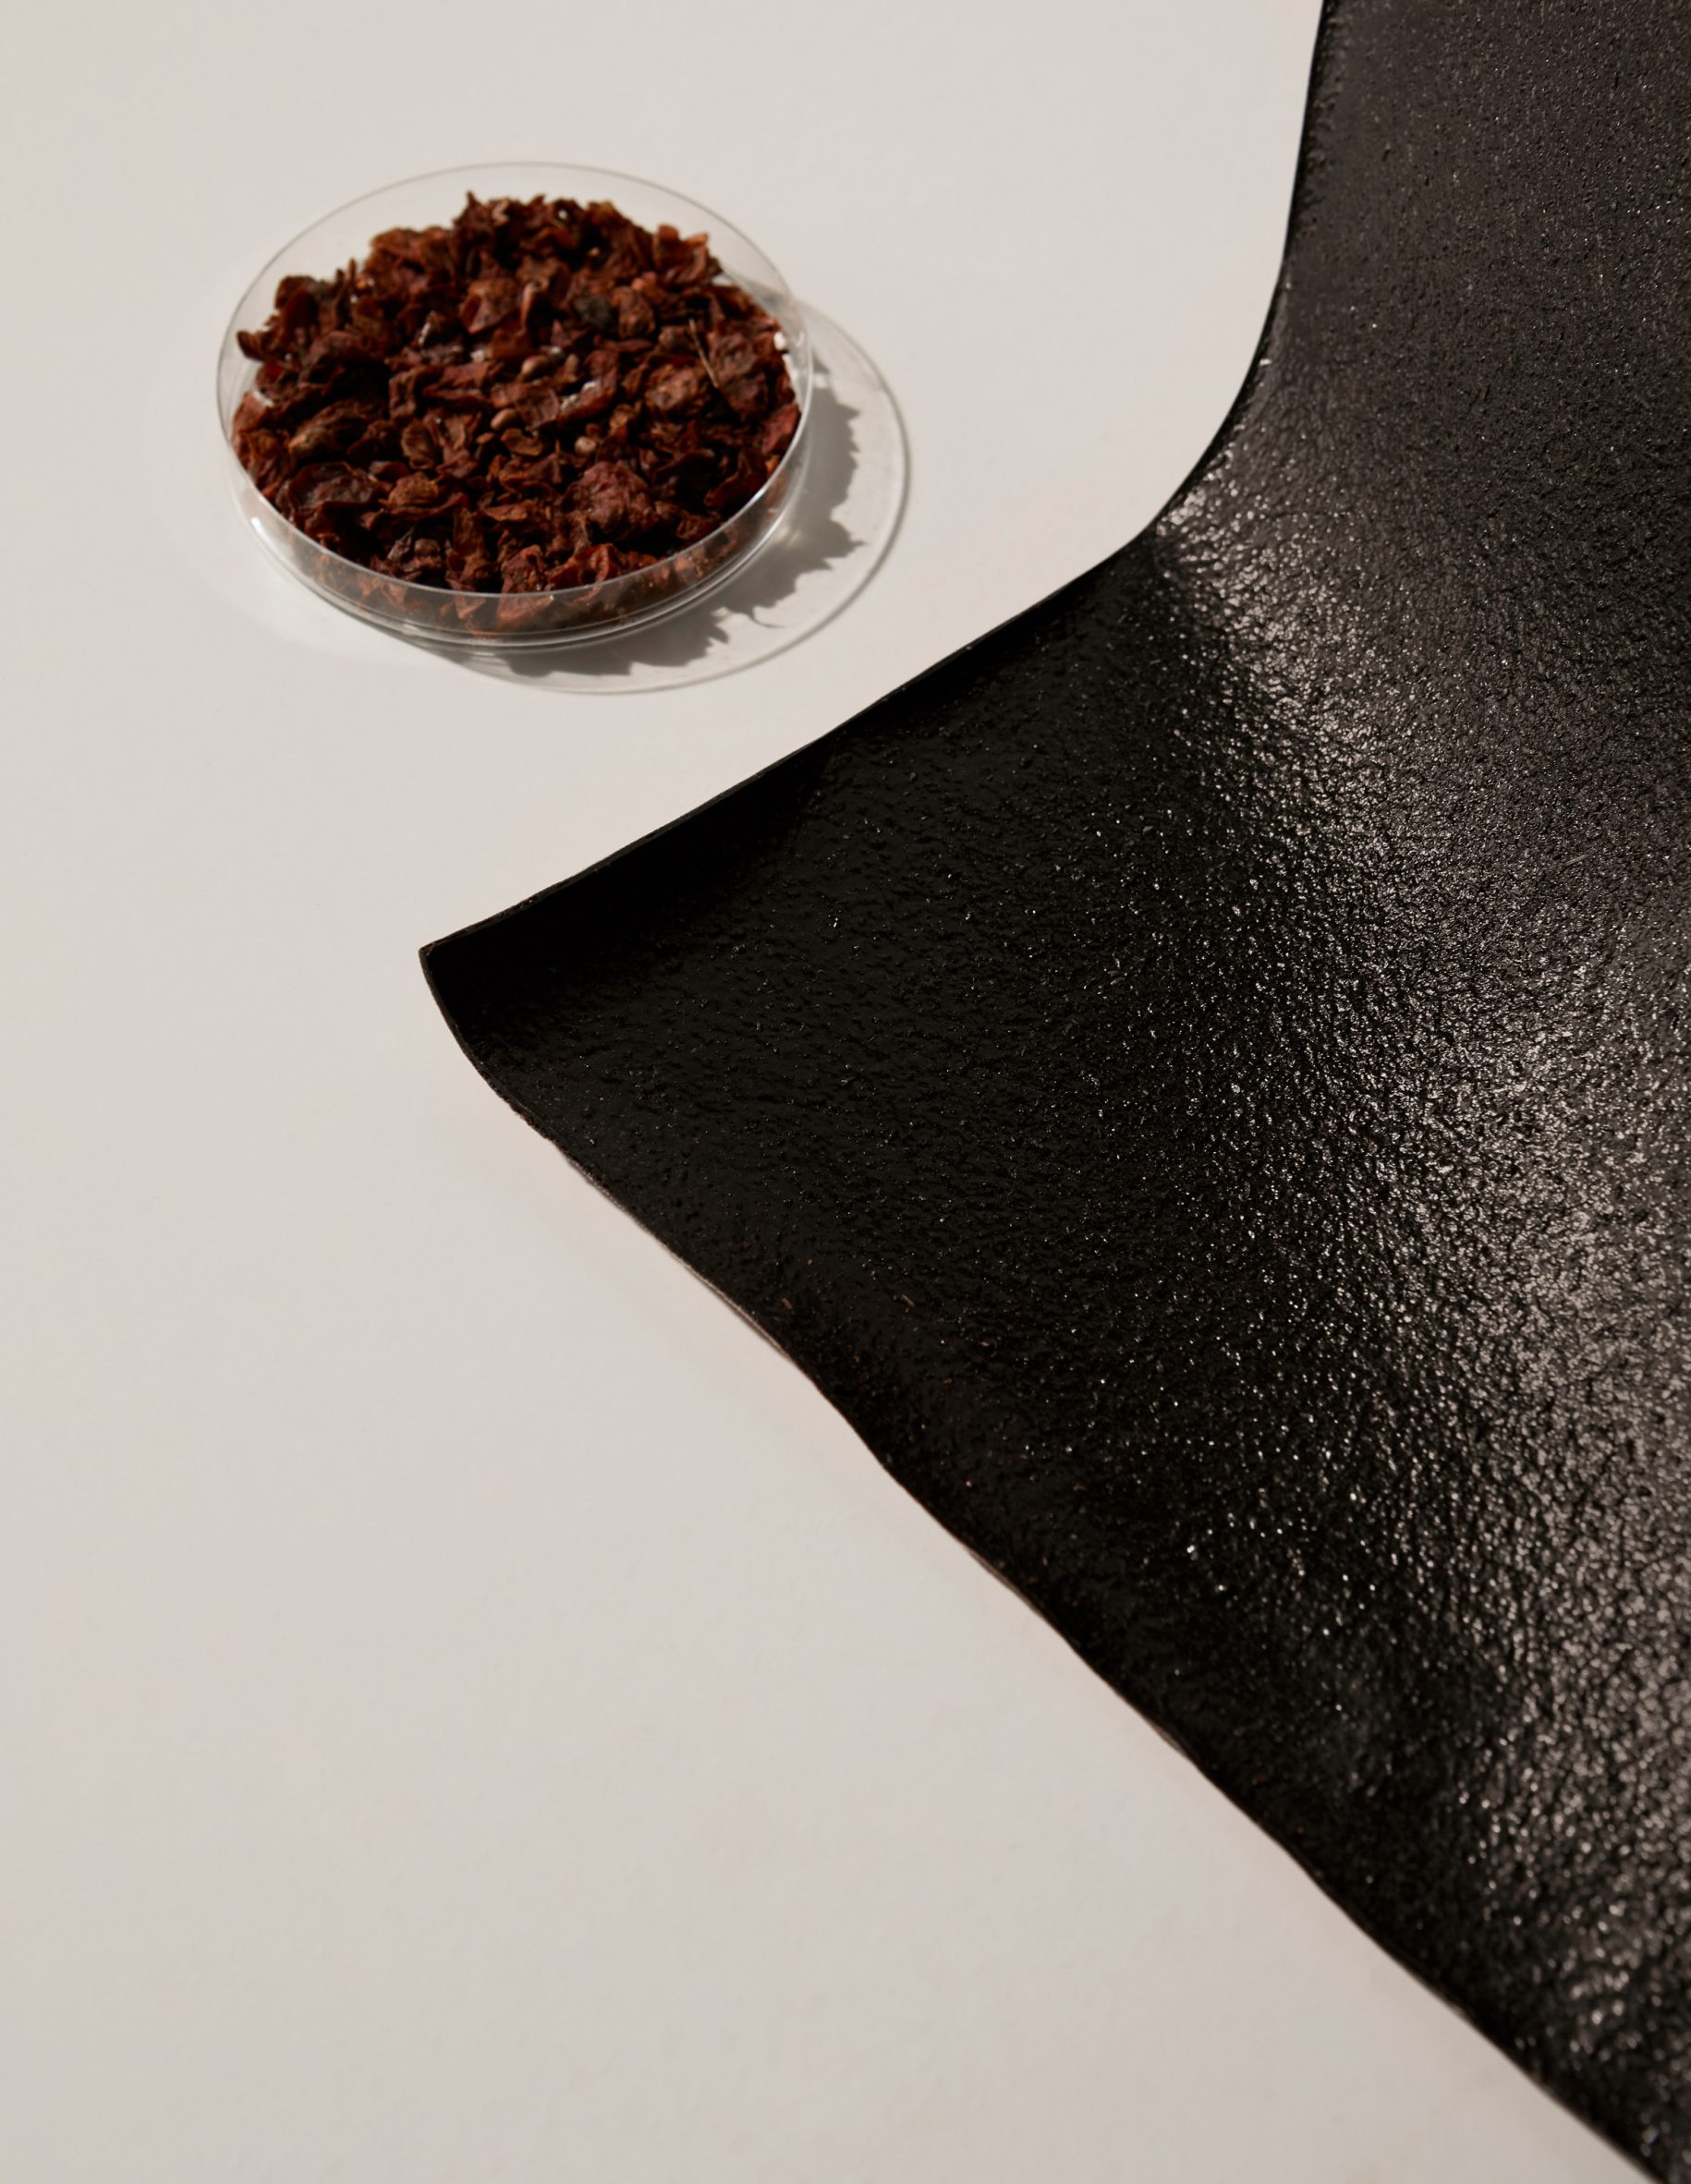 Peelsphere is a leather-alternative biomaterial made from fruit waste